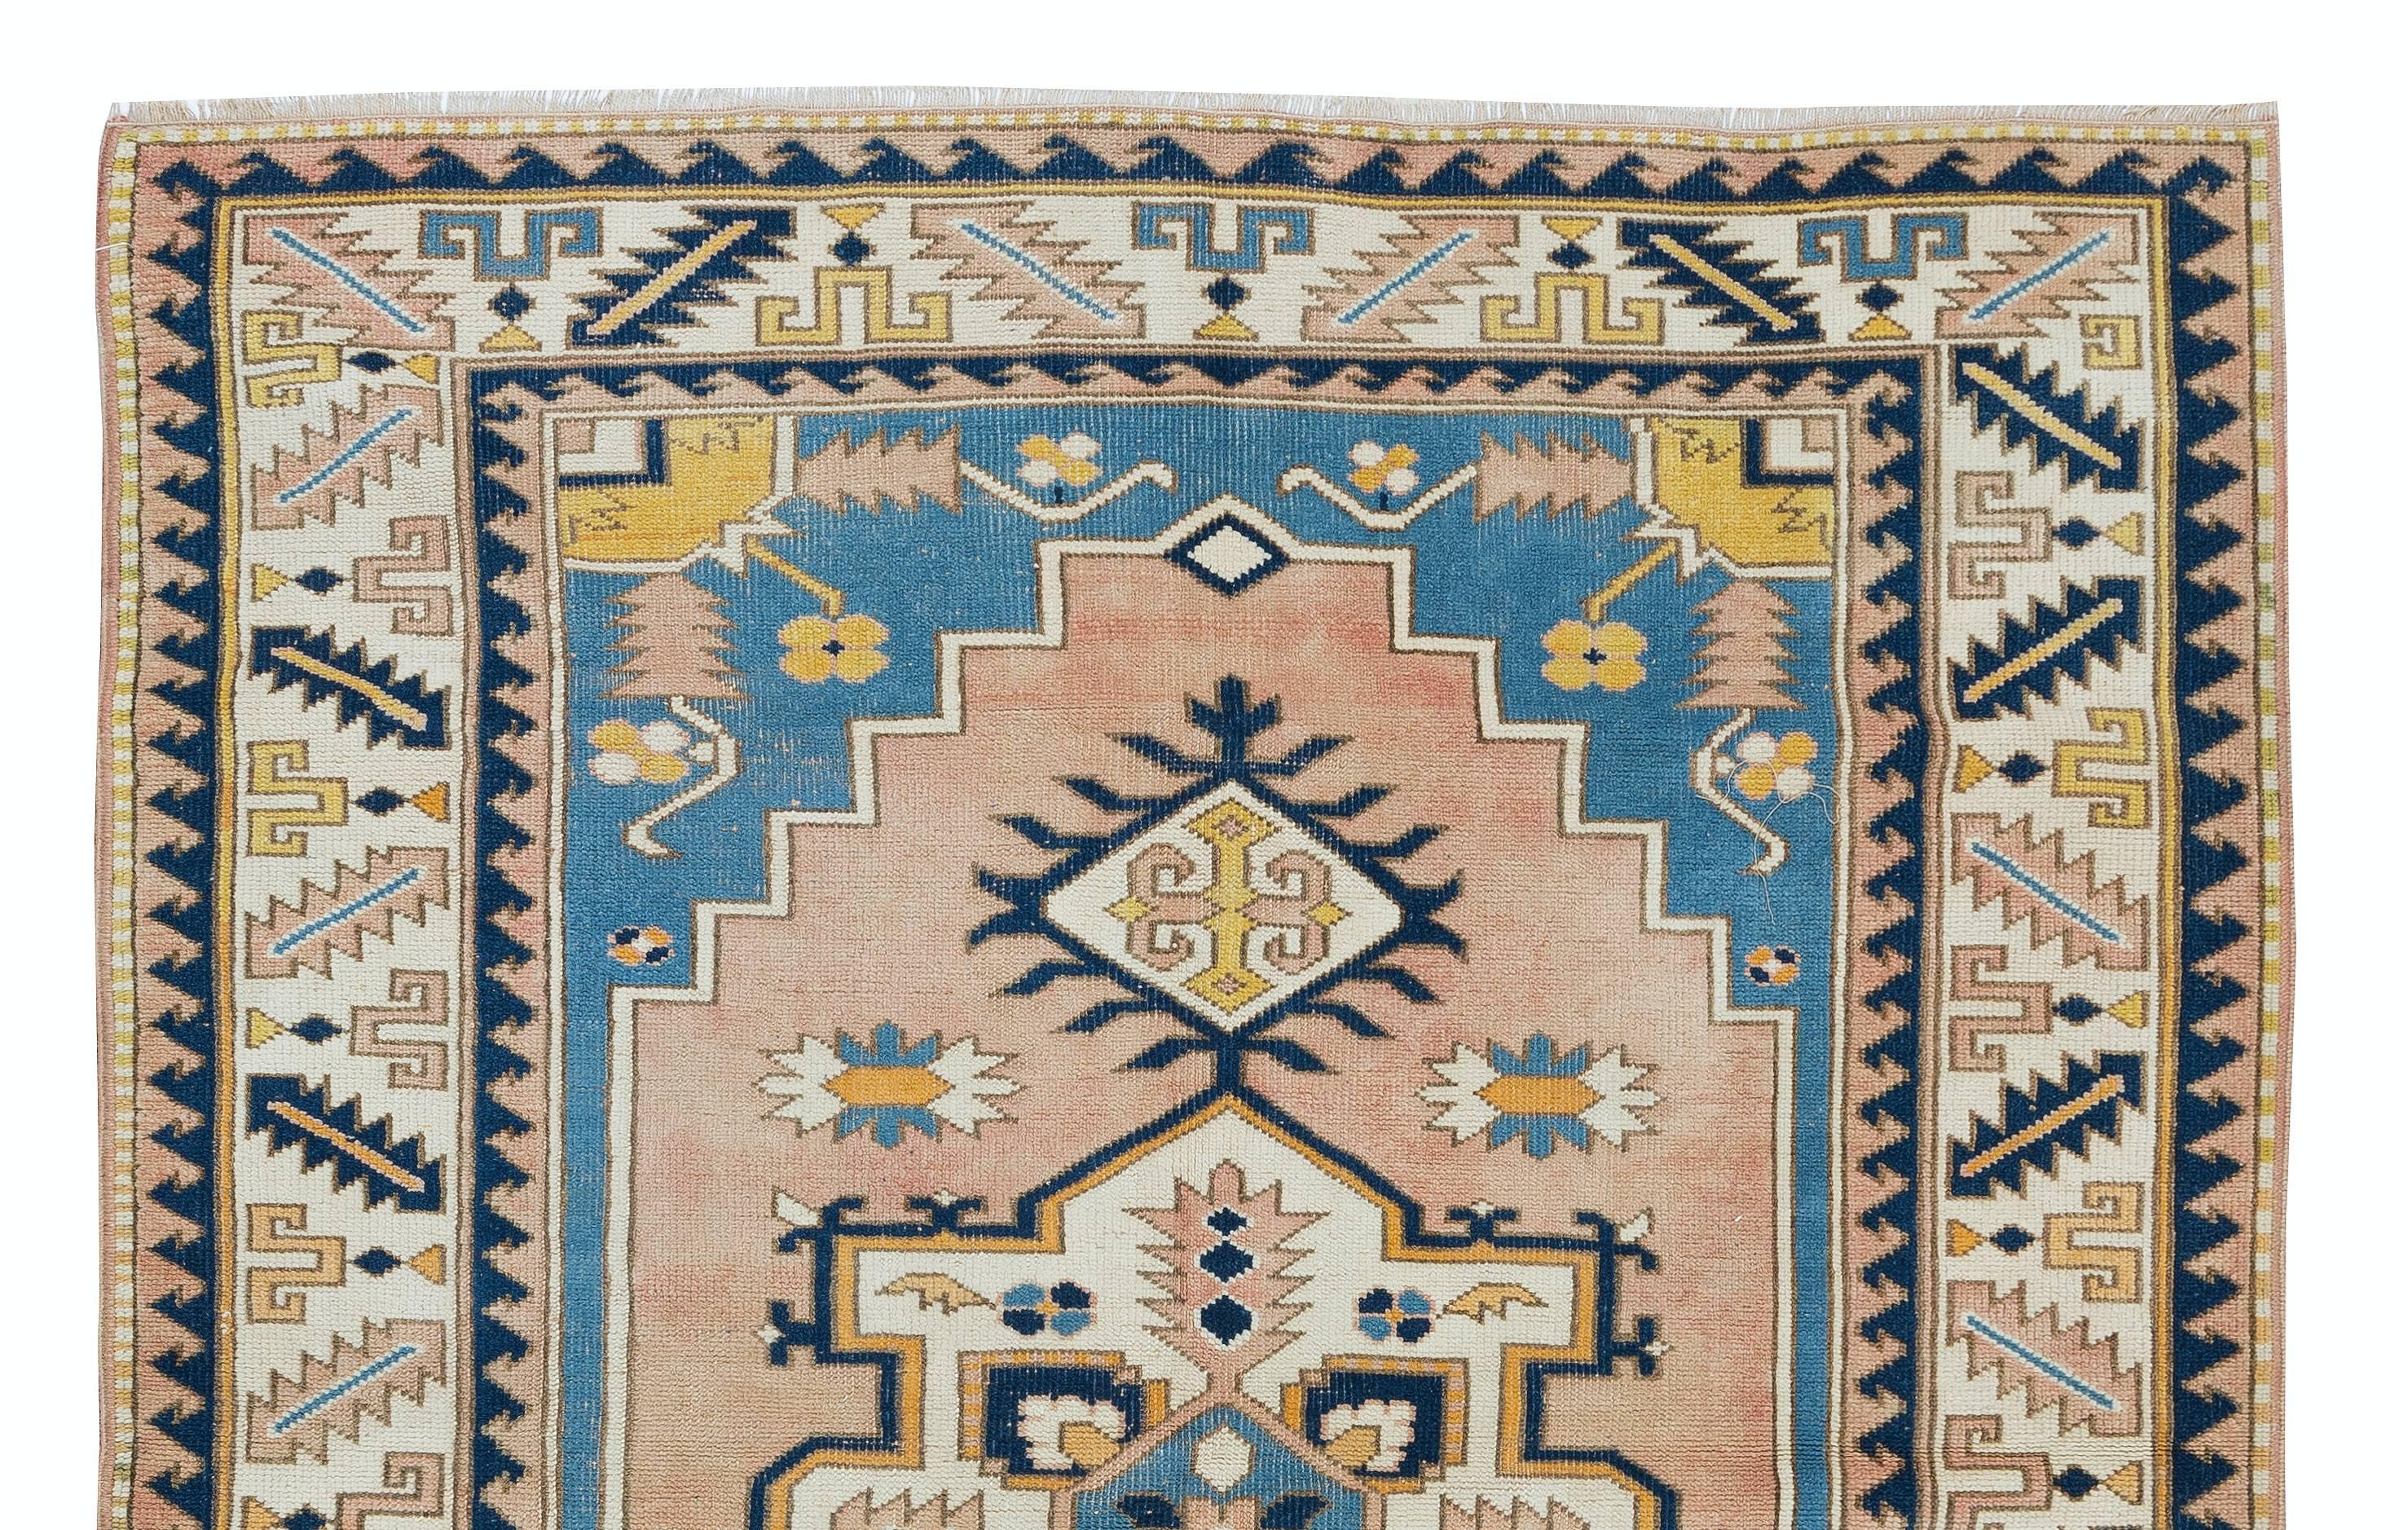 5.5x7.3 Ft Modern Hand Knotted Turkish Geometric Patterned Area Rug, 100% Wool In Excellent Condition For Sale In Philadelphia, PA